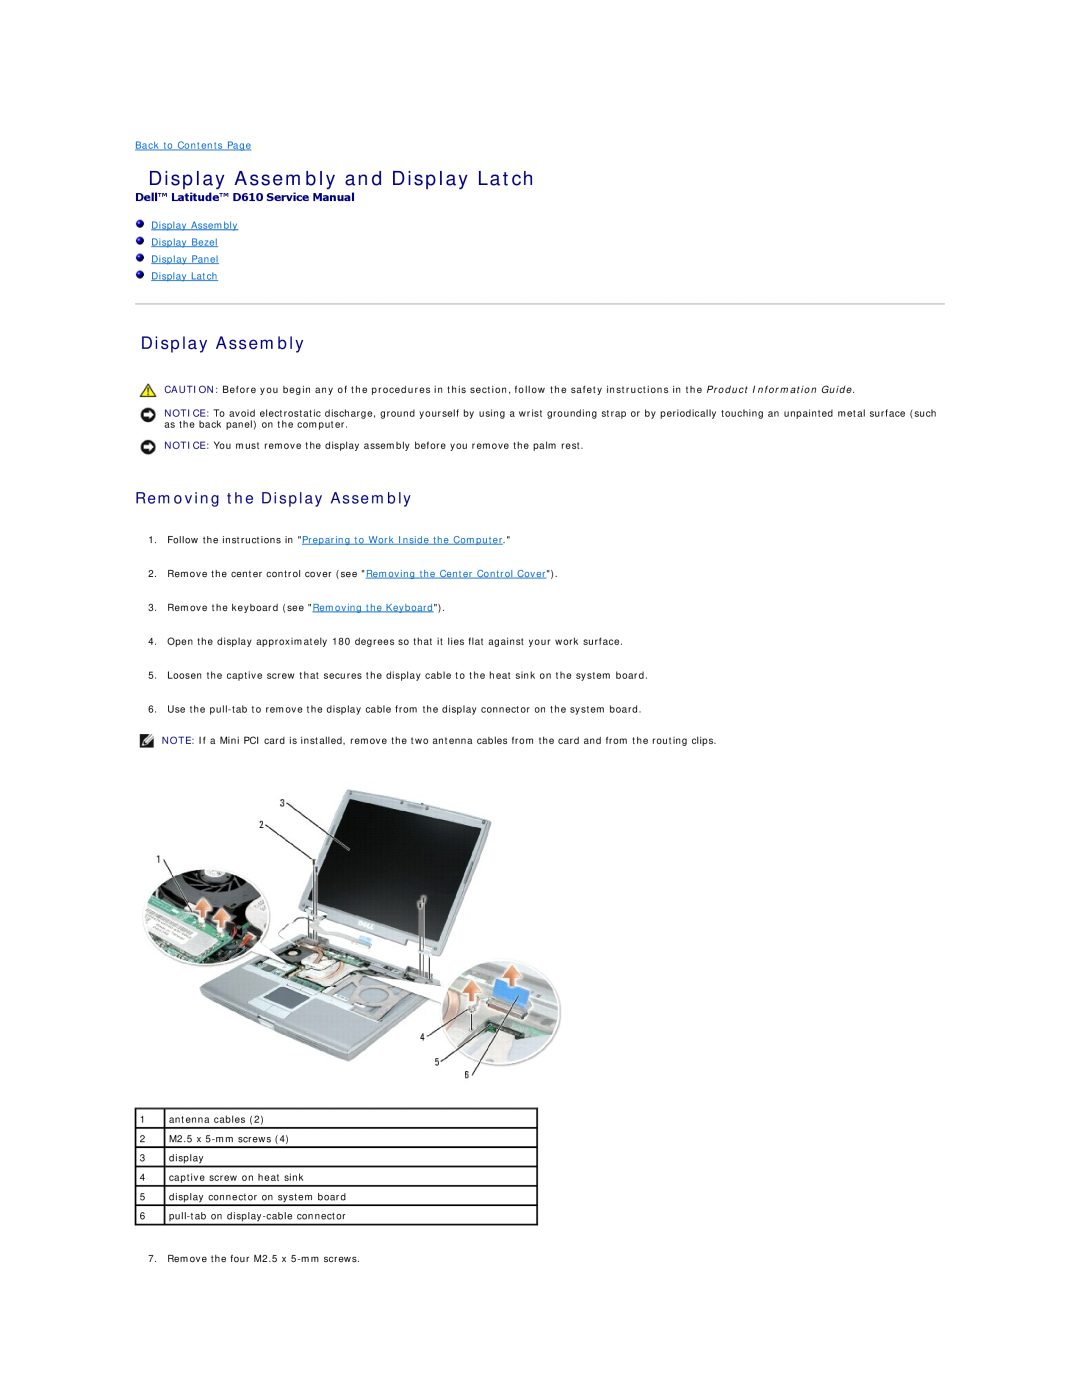 Dell manual Display Assembly and Display Latch, Removing the Display Assembly, Dell Latitude D610 Service Manual 